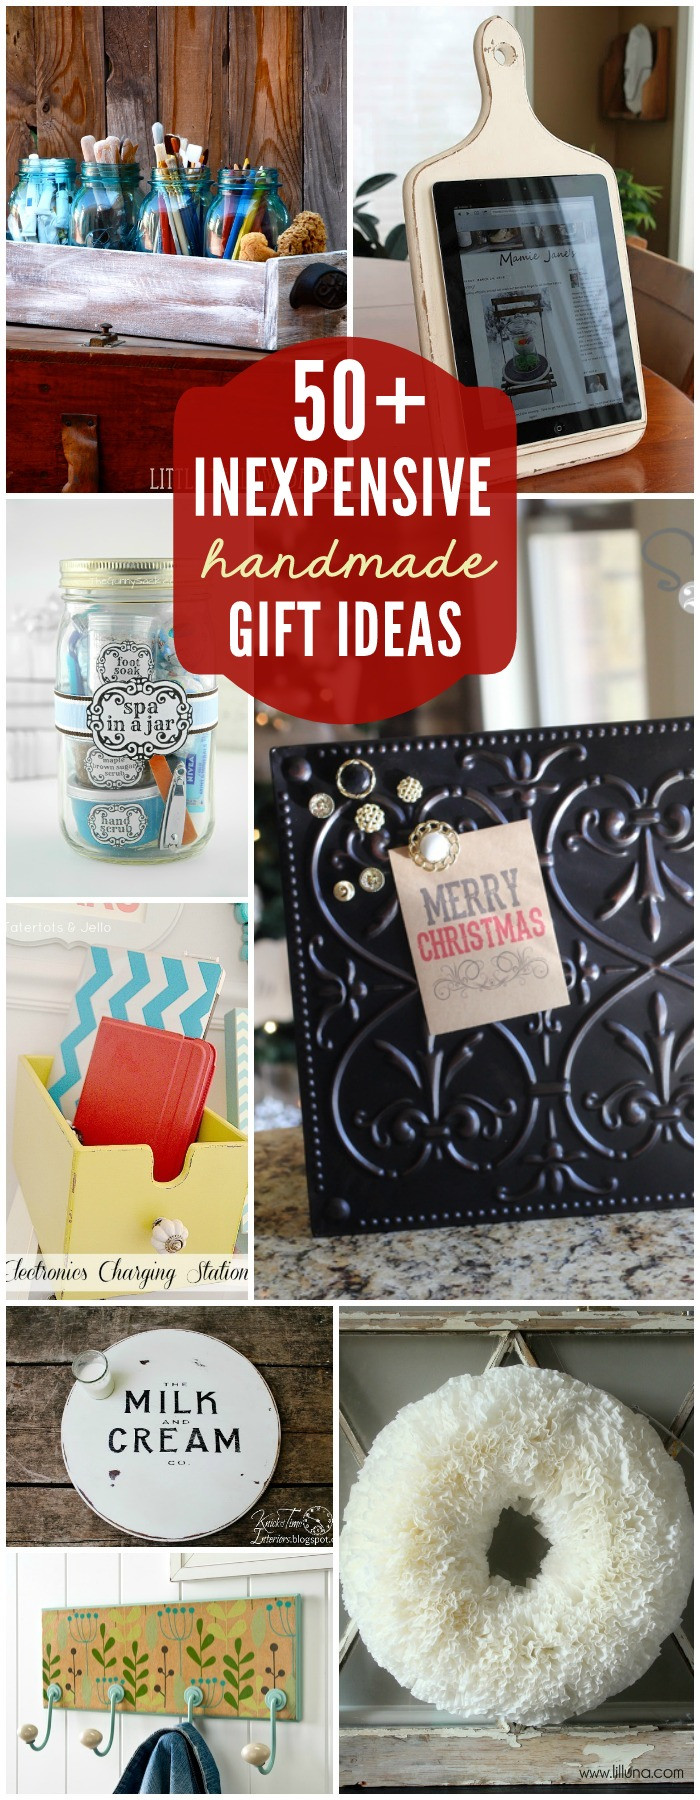 Christmas Gifts Ideas DIY
 75 Gift Ideas under $5